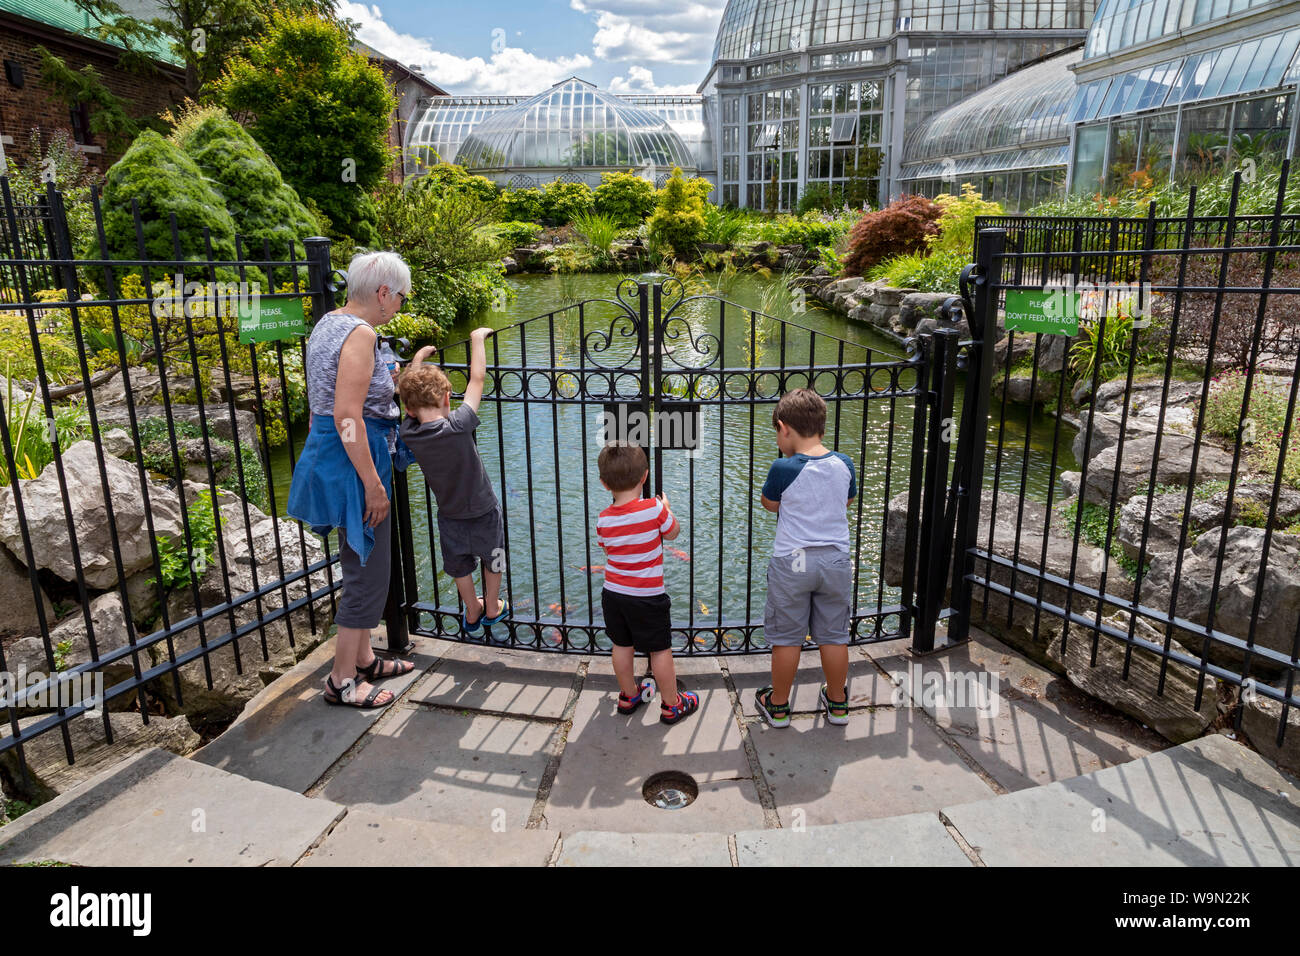 Detroit, Michigan - Children watch fish in the koi pond at the Belle Isle Aquarium. Designed by Detroit architect Albert Kahn and opened in 1904, is t Stock Photo